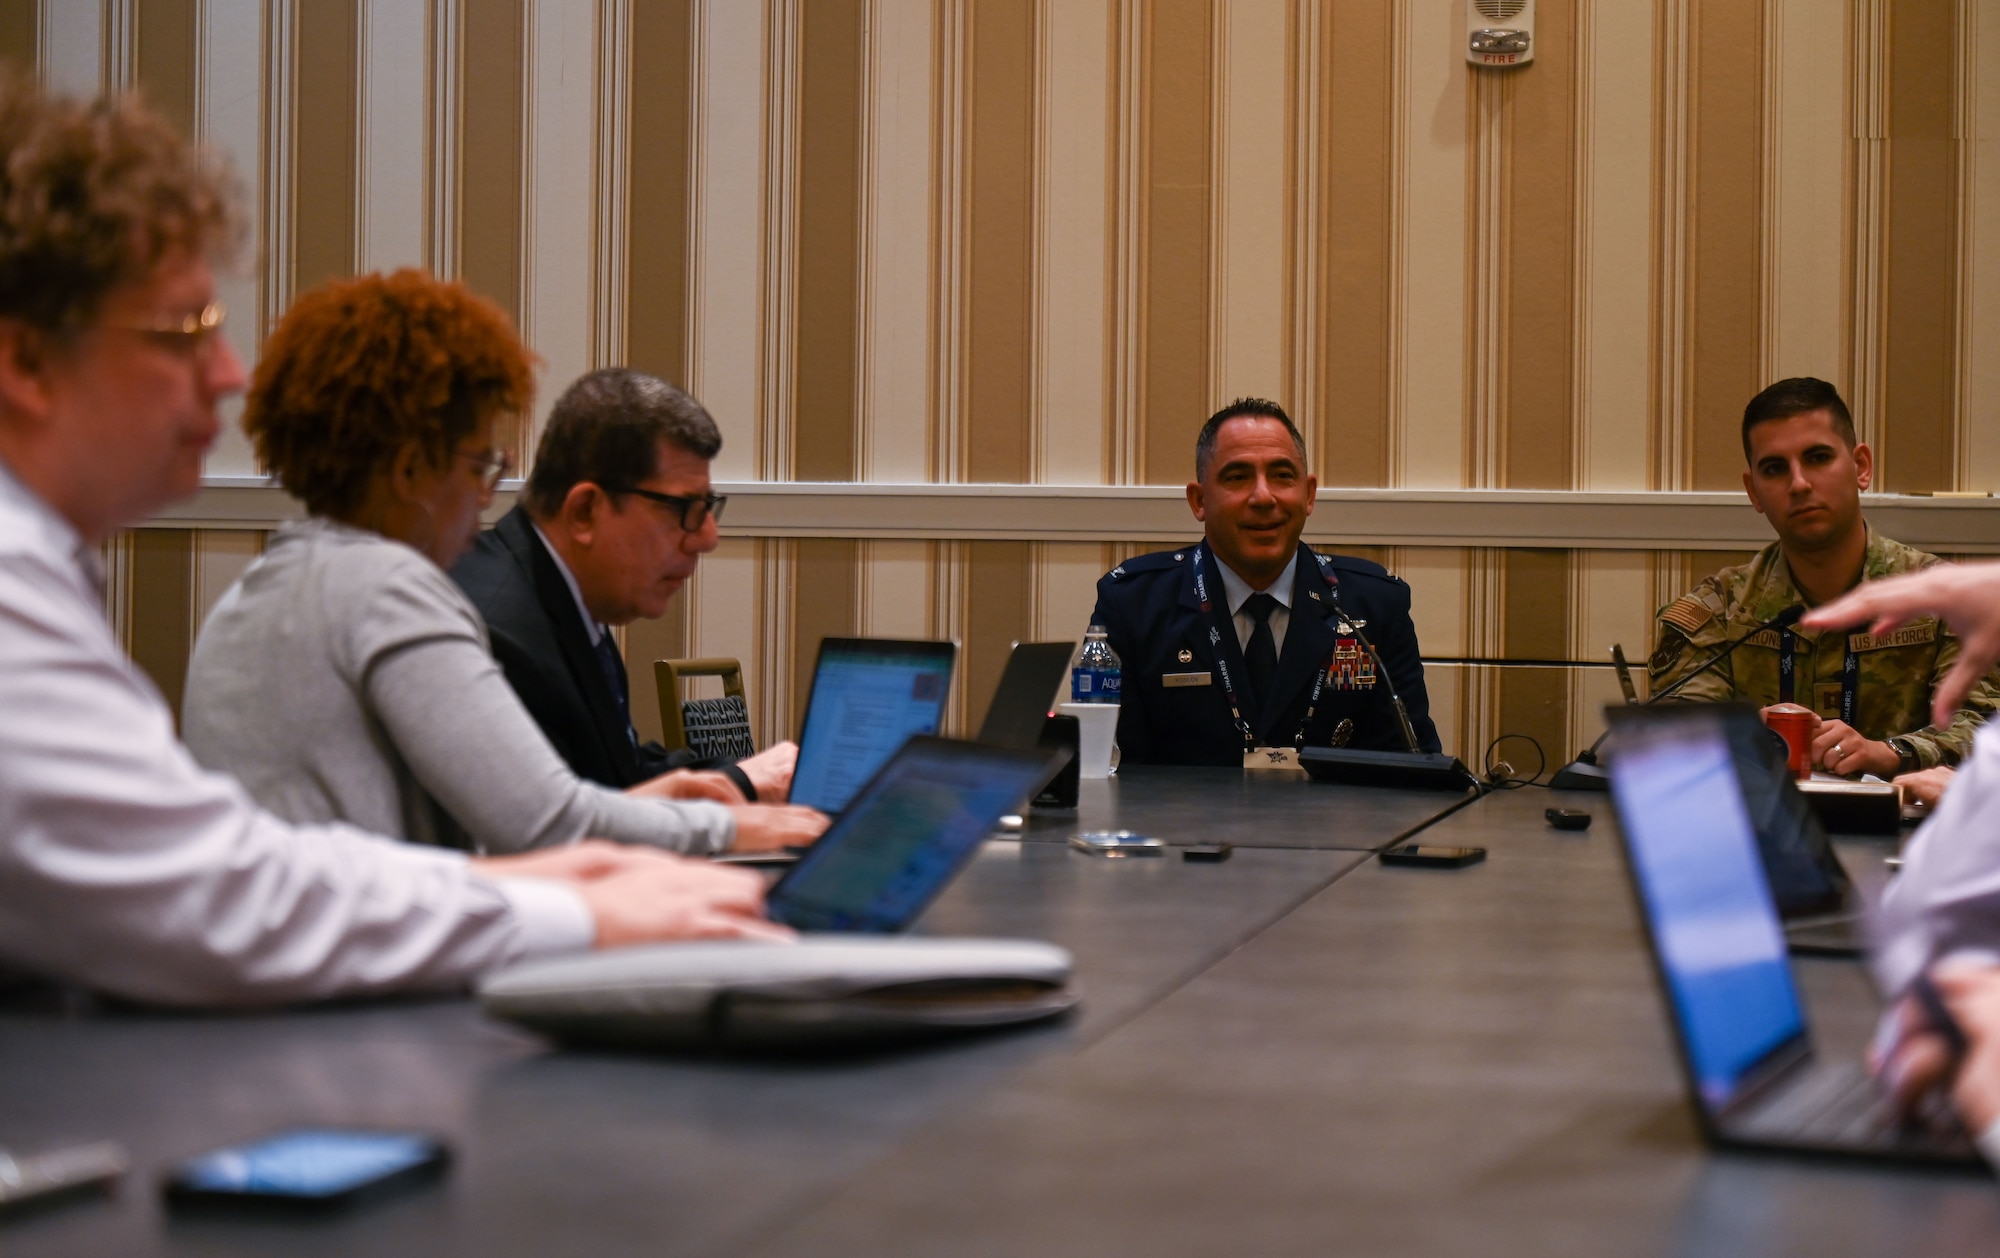 U.S. Air Force Col. Josh Koslov, 350th Spectrum Warfare Wing commander, hosts a media roundtable during the Air & Space Forces Association’s (AFA) Air, Space & Cyber Conference at the Gaylord National Resort & Convention Center in National Harbor, Md., Sept. 13, 2023. During the round table, Koslov discussed the importance for the Air Force to have the ability to generate, sustain, and deliver decisive multi-domain effects to achieve air component commander objectives depends on the ability to dominate the Spectrum.  (U.S. Air Force photo by Staff Sgt. Ericka A. Woolever)